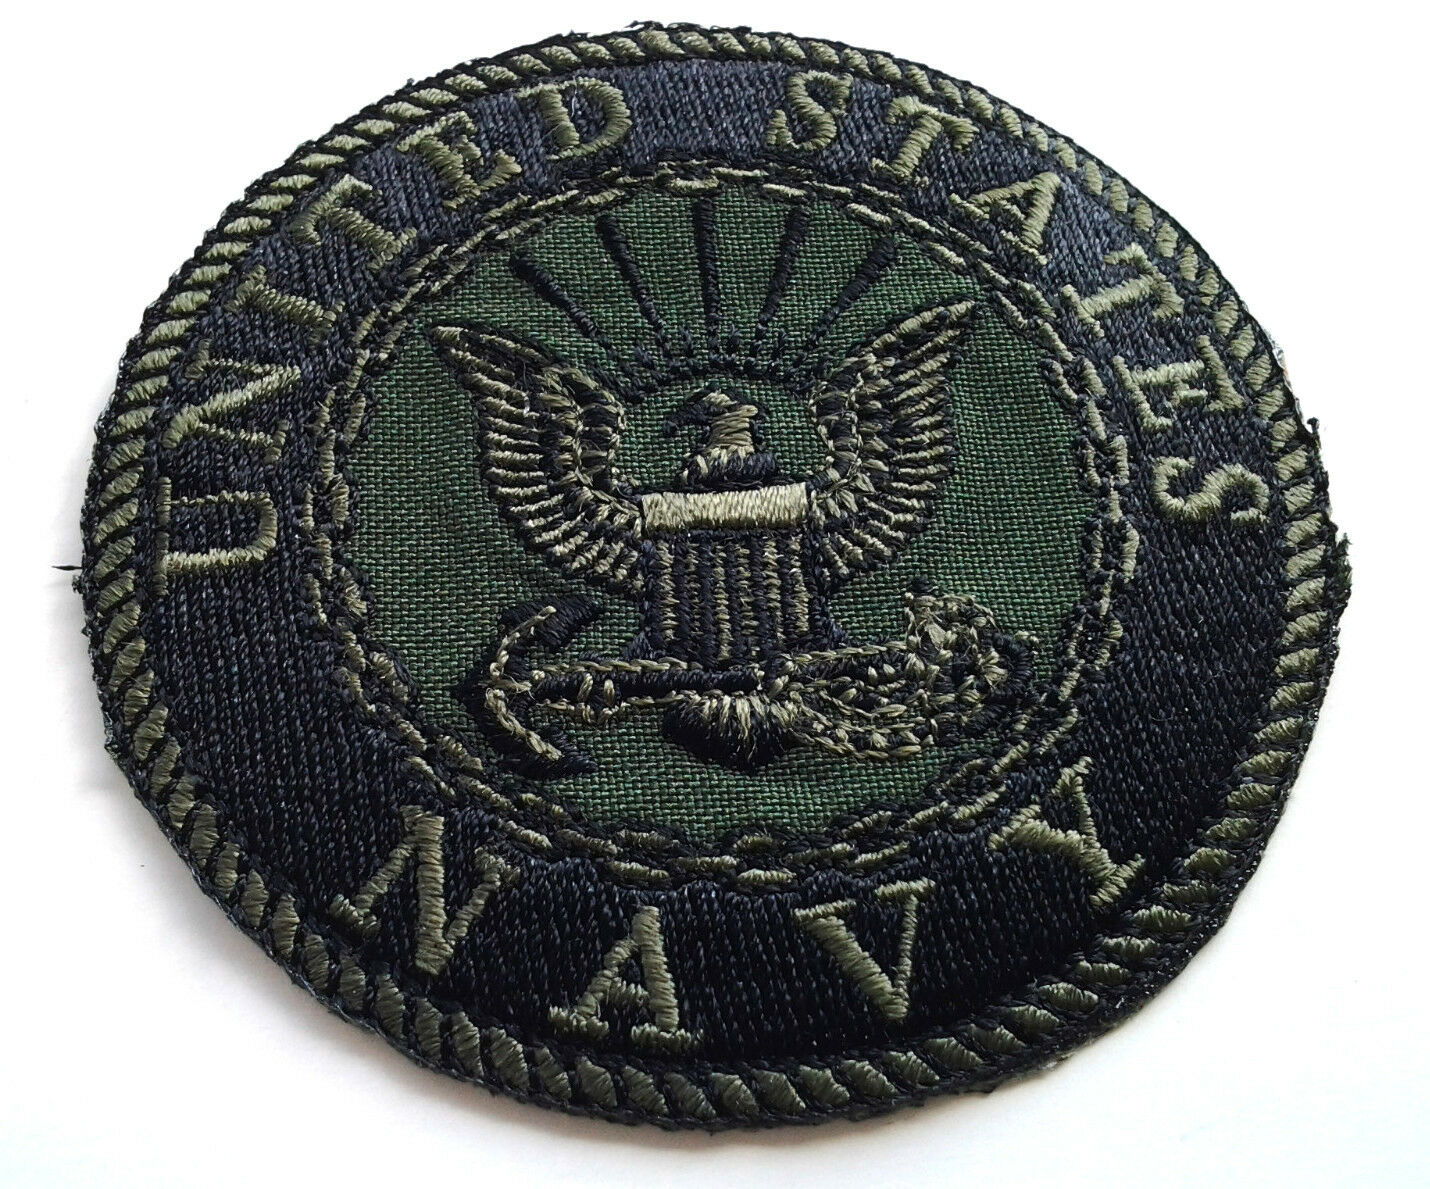 United States Navy Subdued (3-1/8" Rd) Military Biker Patch Pm0896 Ee T